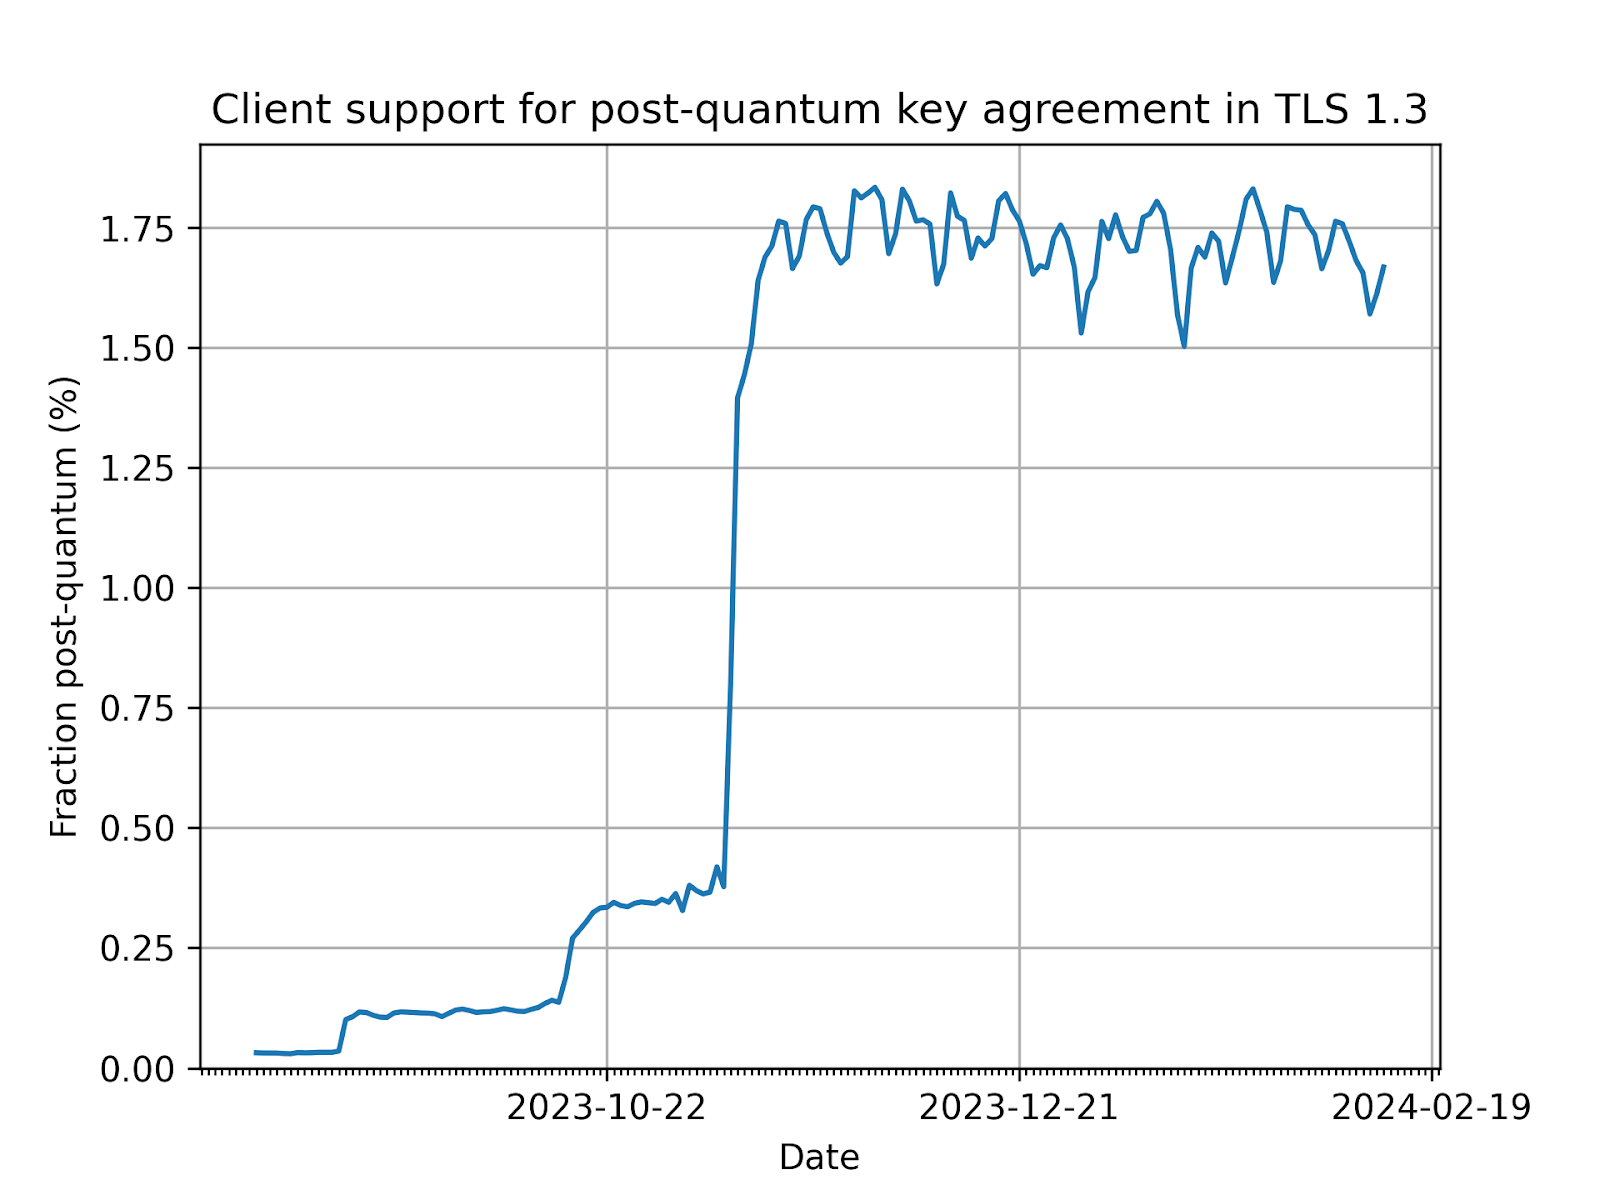 Fraction of TLS 1.3 connections established with Cloudflare that are secured with post-quantum cryptography.